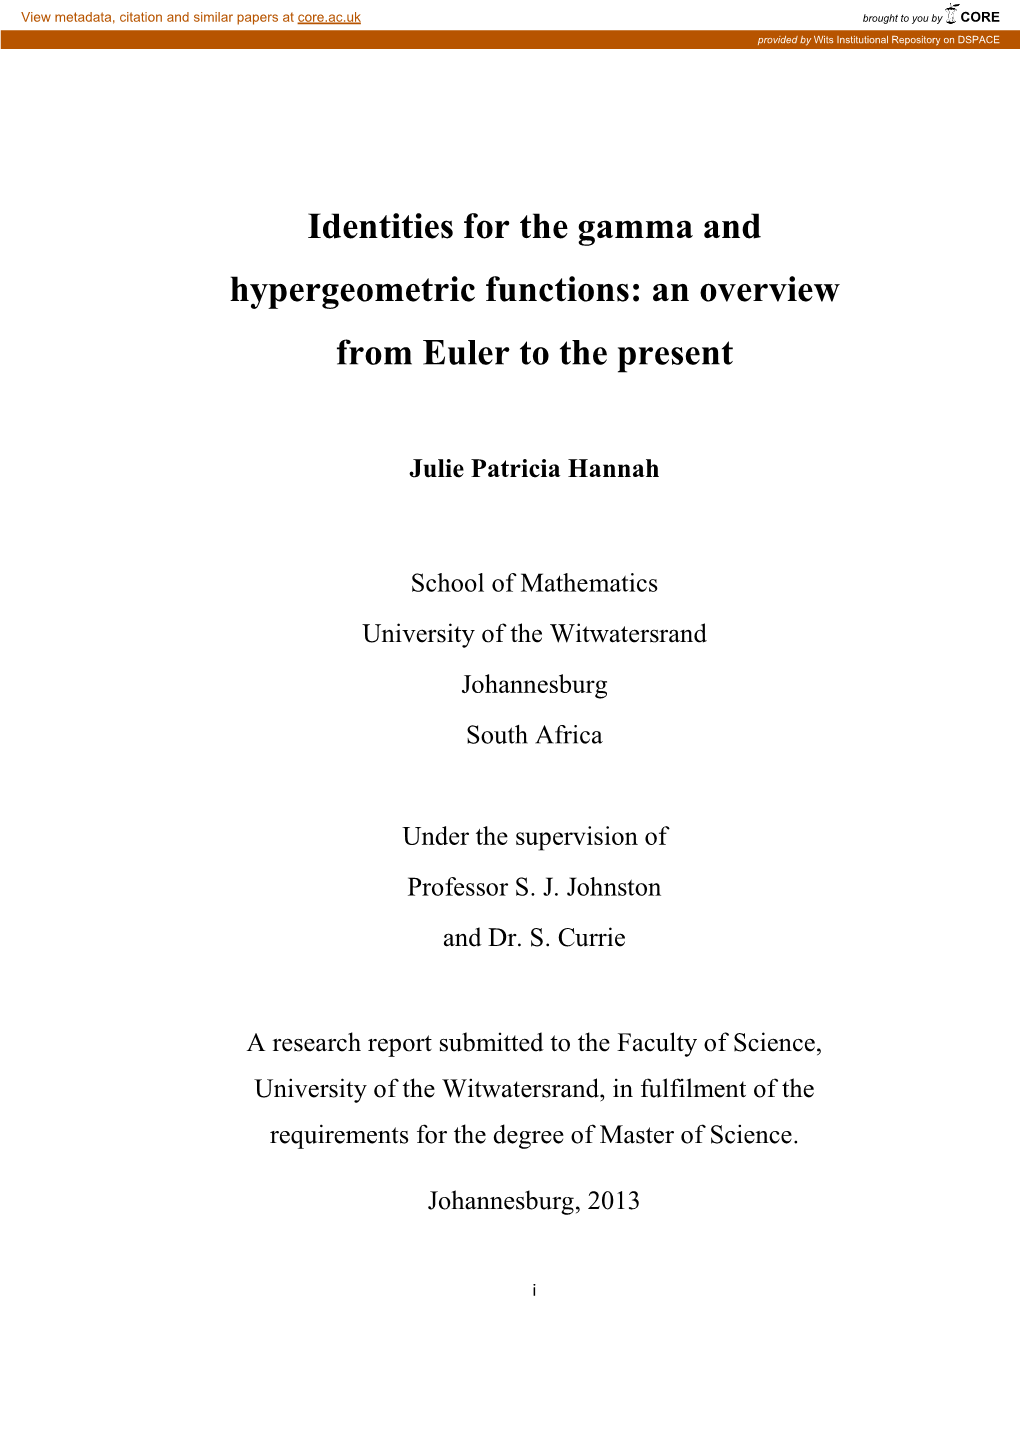 Identities for the Gamma and Hypergeometric Functions: an Overview